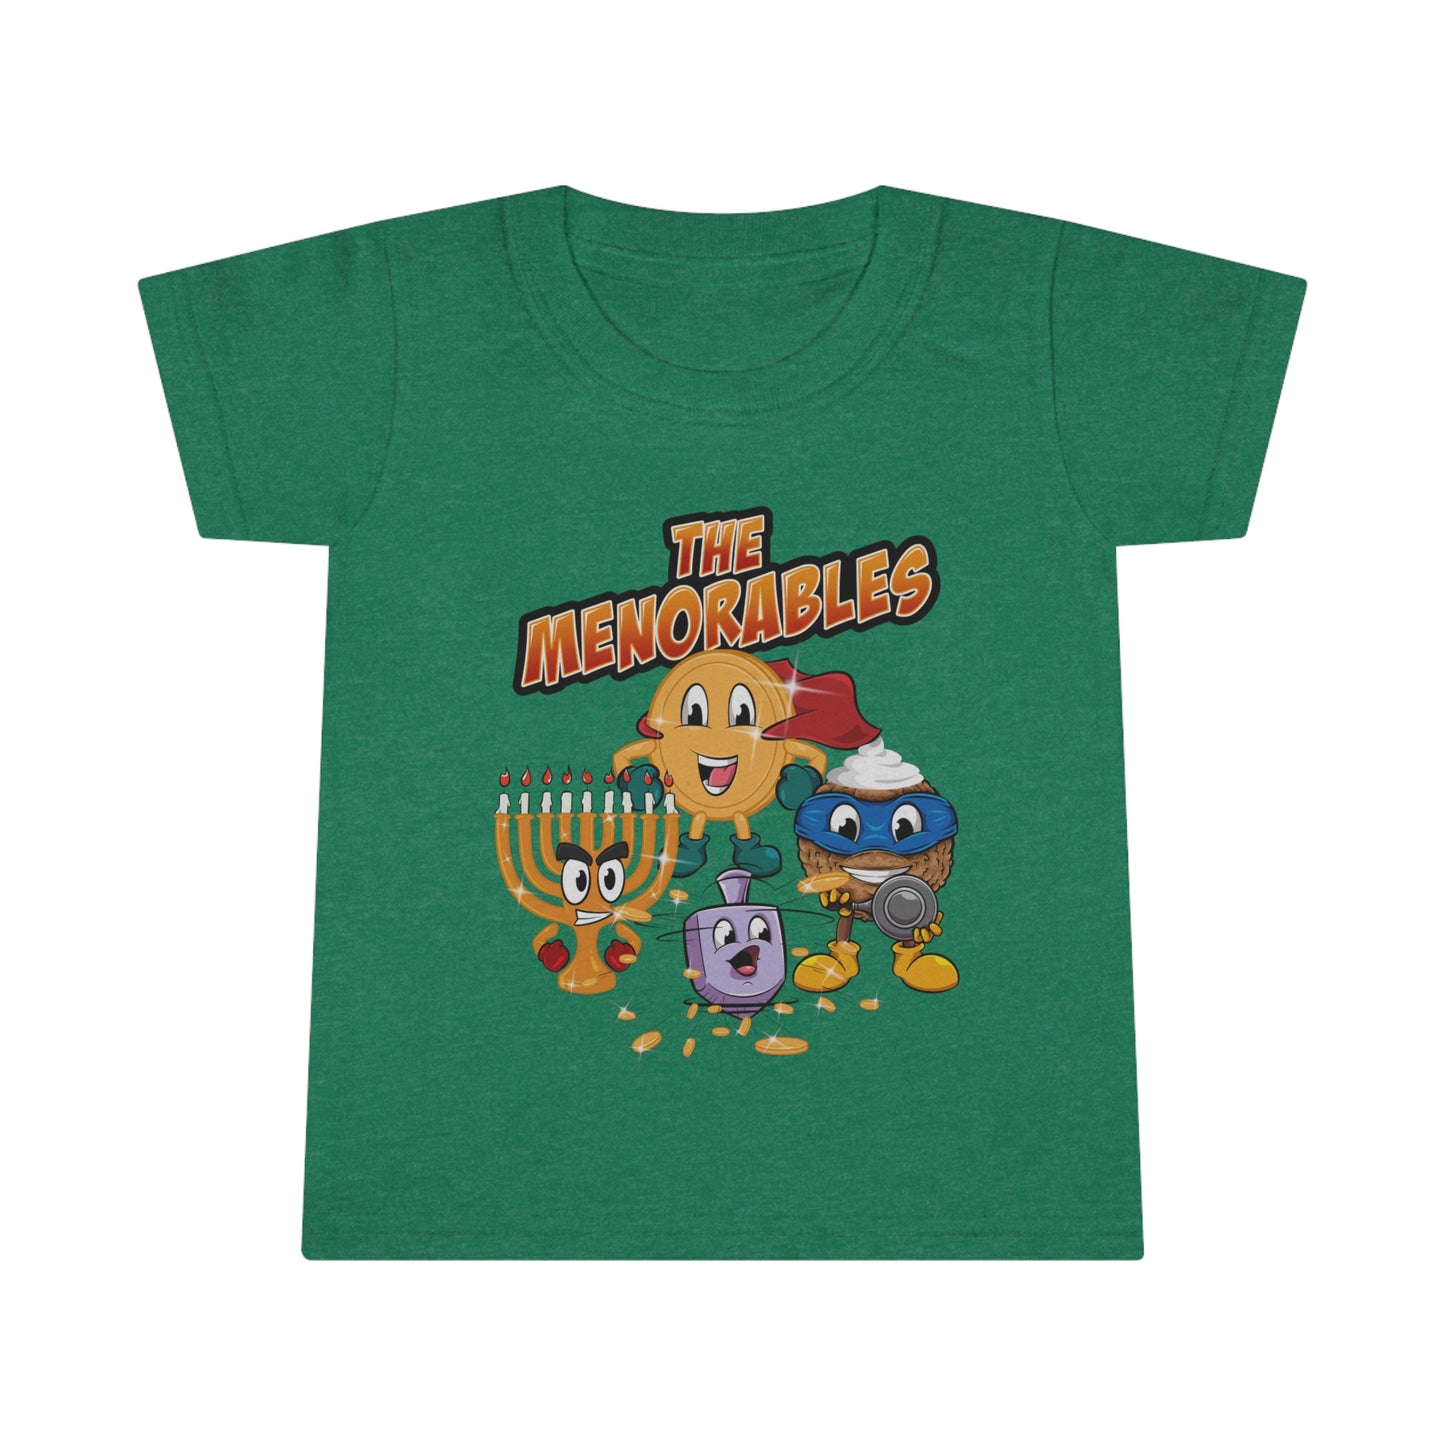 The Menorables Toddler T-shirt